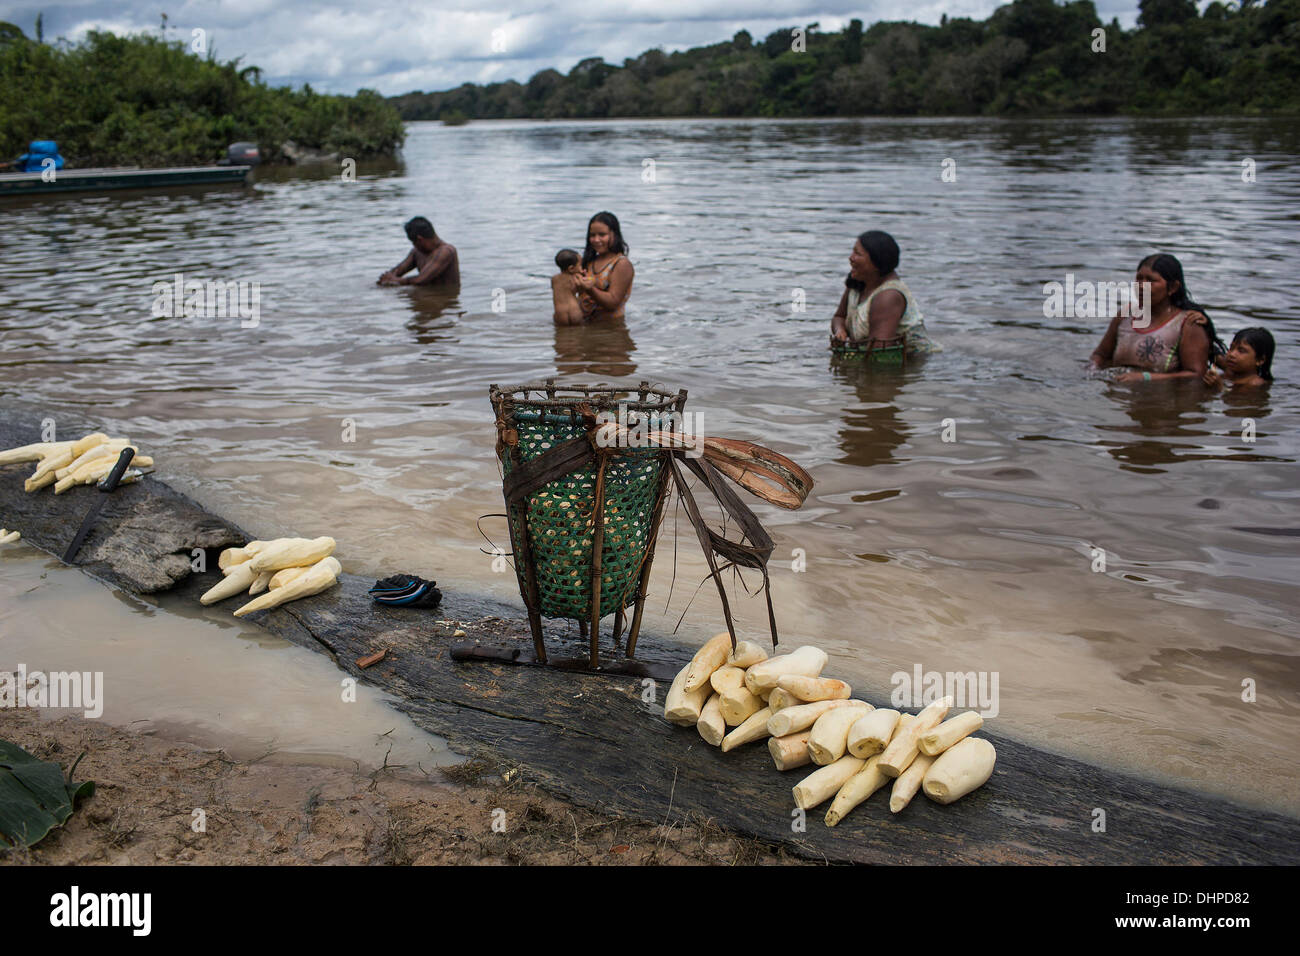 May 9, 2013 - Poti-Kro, Para, Brazil - Much daily activity happens at the riverside. Here, Xikrin women combine washing harvested yucca with bathing. The indigenous Xikrin people live on the Bacaja, a tributary of the Xingu River, where construction of the Belo Monte Dam is reaching peak construction. Some scientists warn that the water level of the Bacaja will decrease precipitously due to the dam. (Credit Image: © Taylor Weidman/ZUMA Wire/ZUMAPRESS.com) Stock Photo